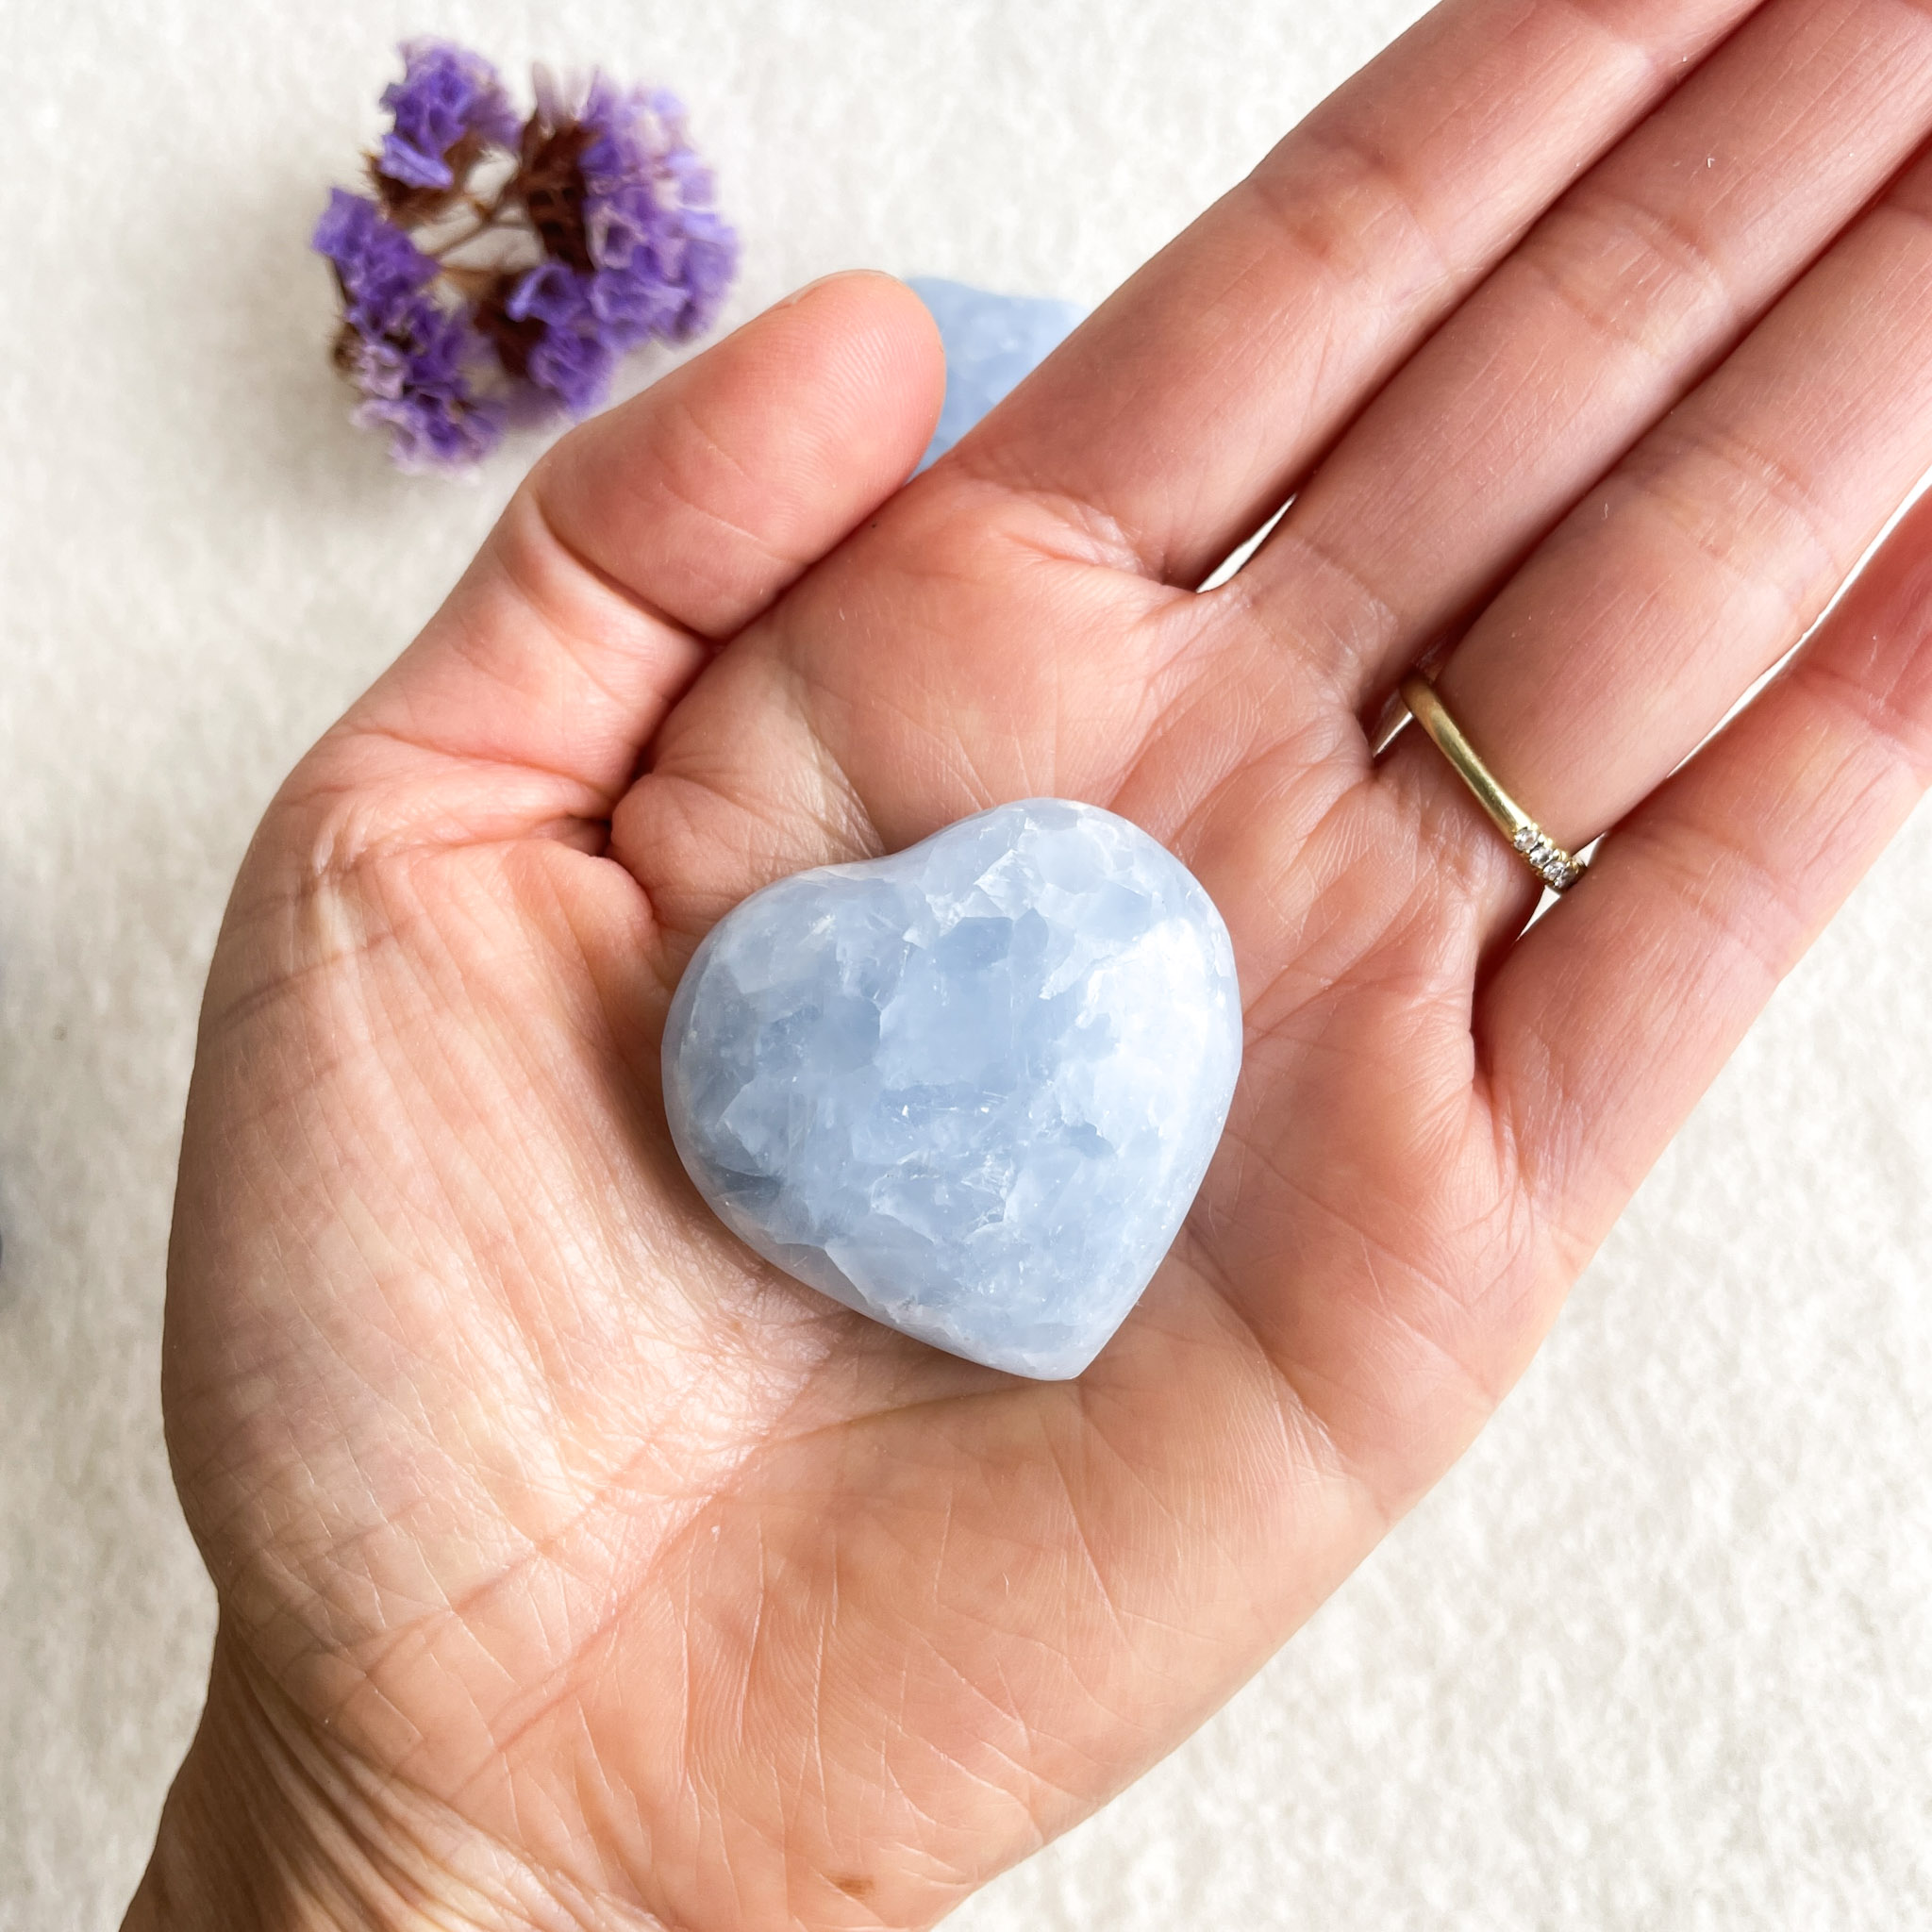 A person's open hand holding a heart-shaped blue crystal, with a gold ring on their ring finger, and a small bunch of dried purple flowers in the upper left corner against a textured off-white background.